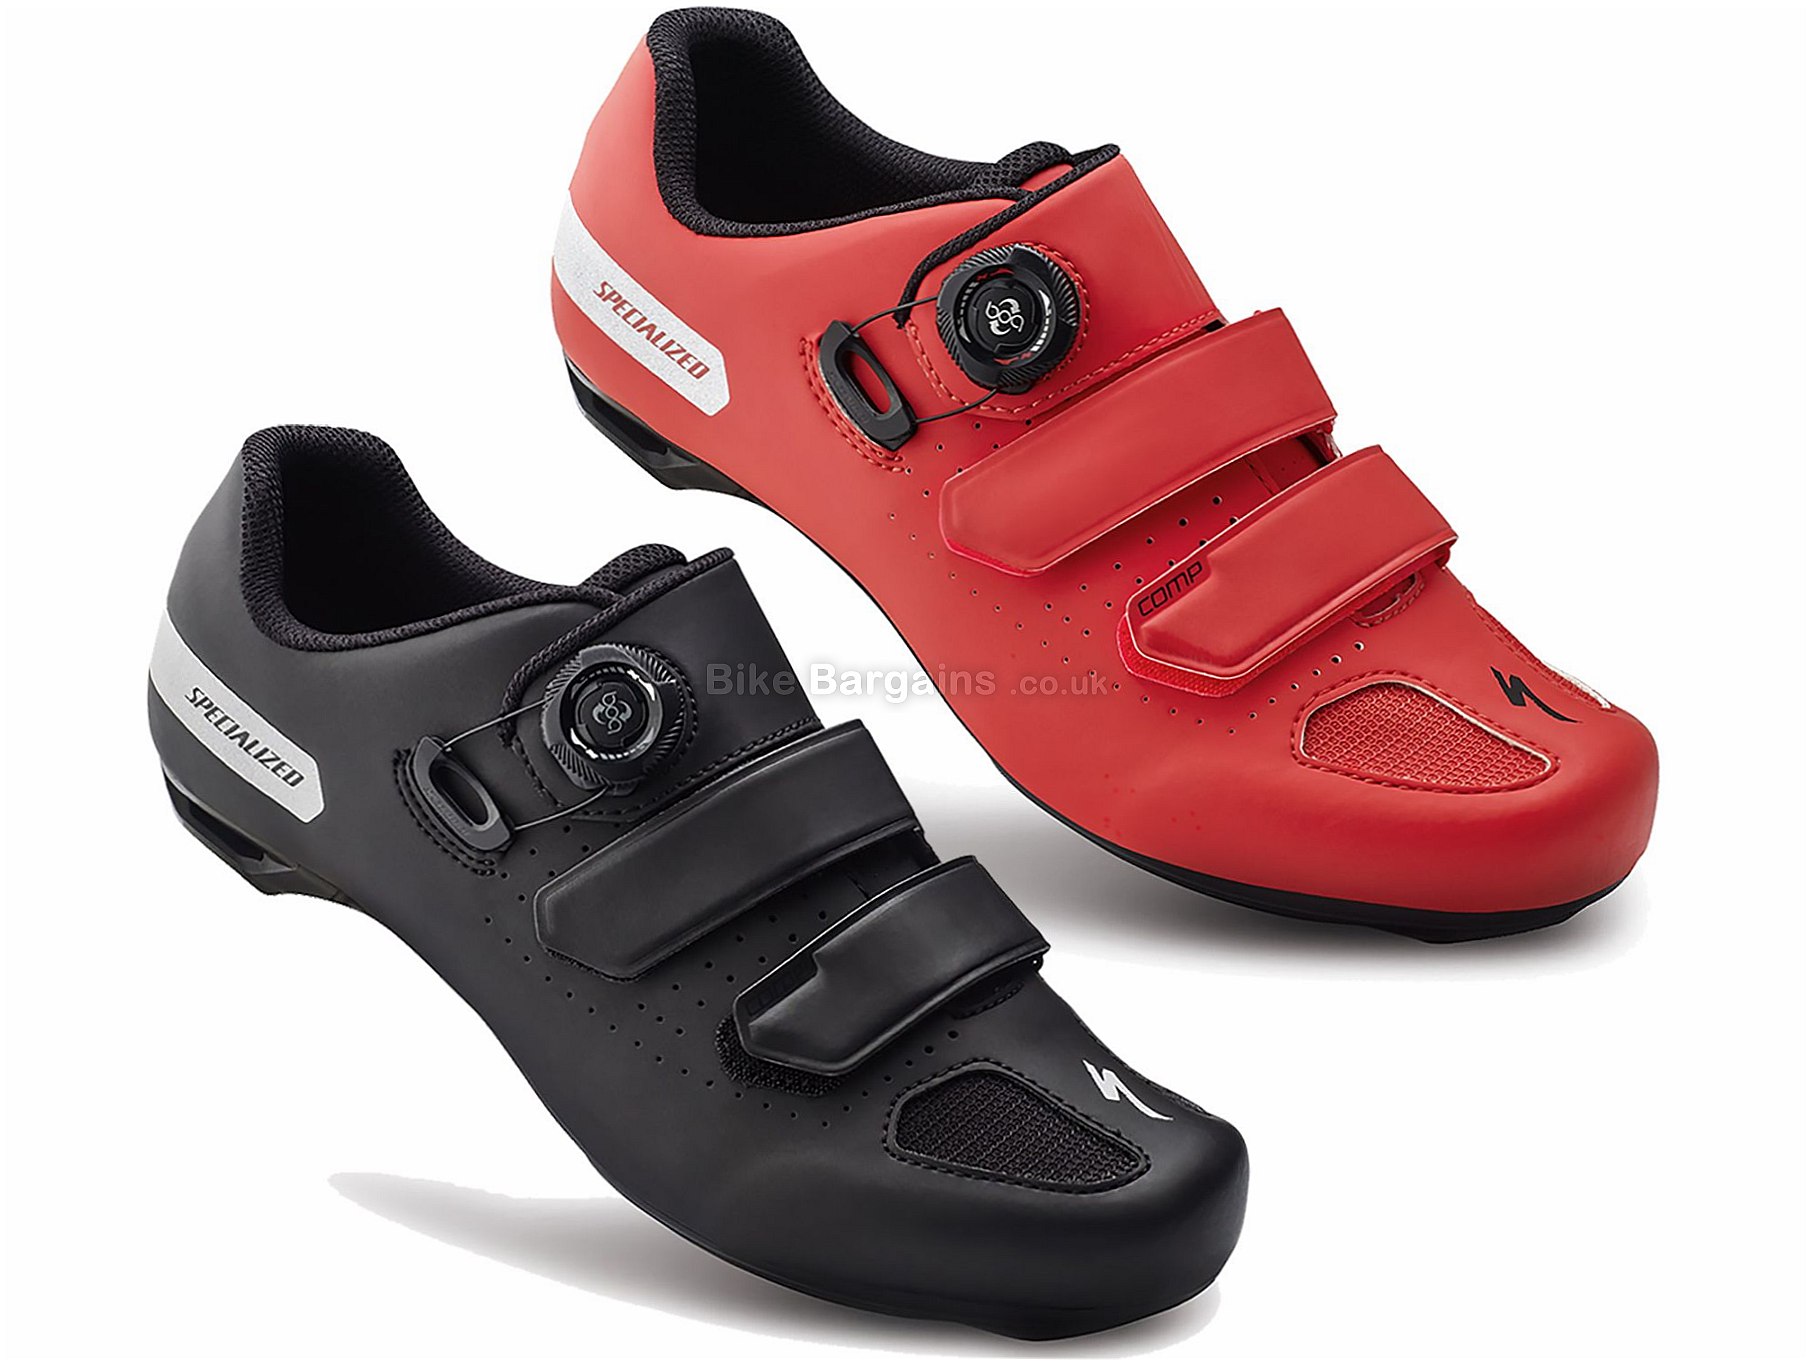 specialized comp shoes